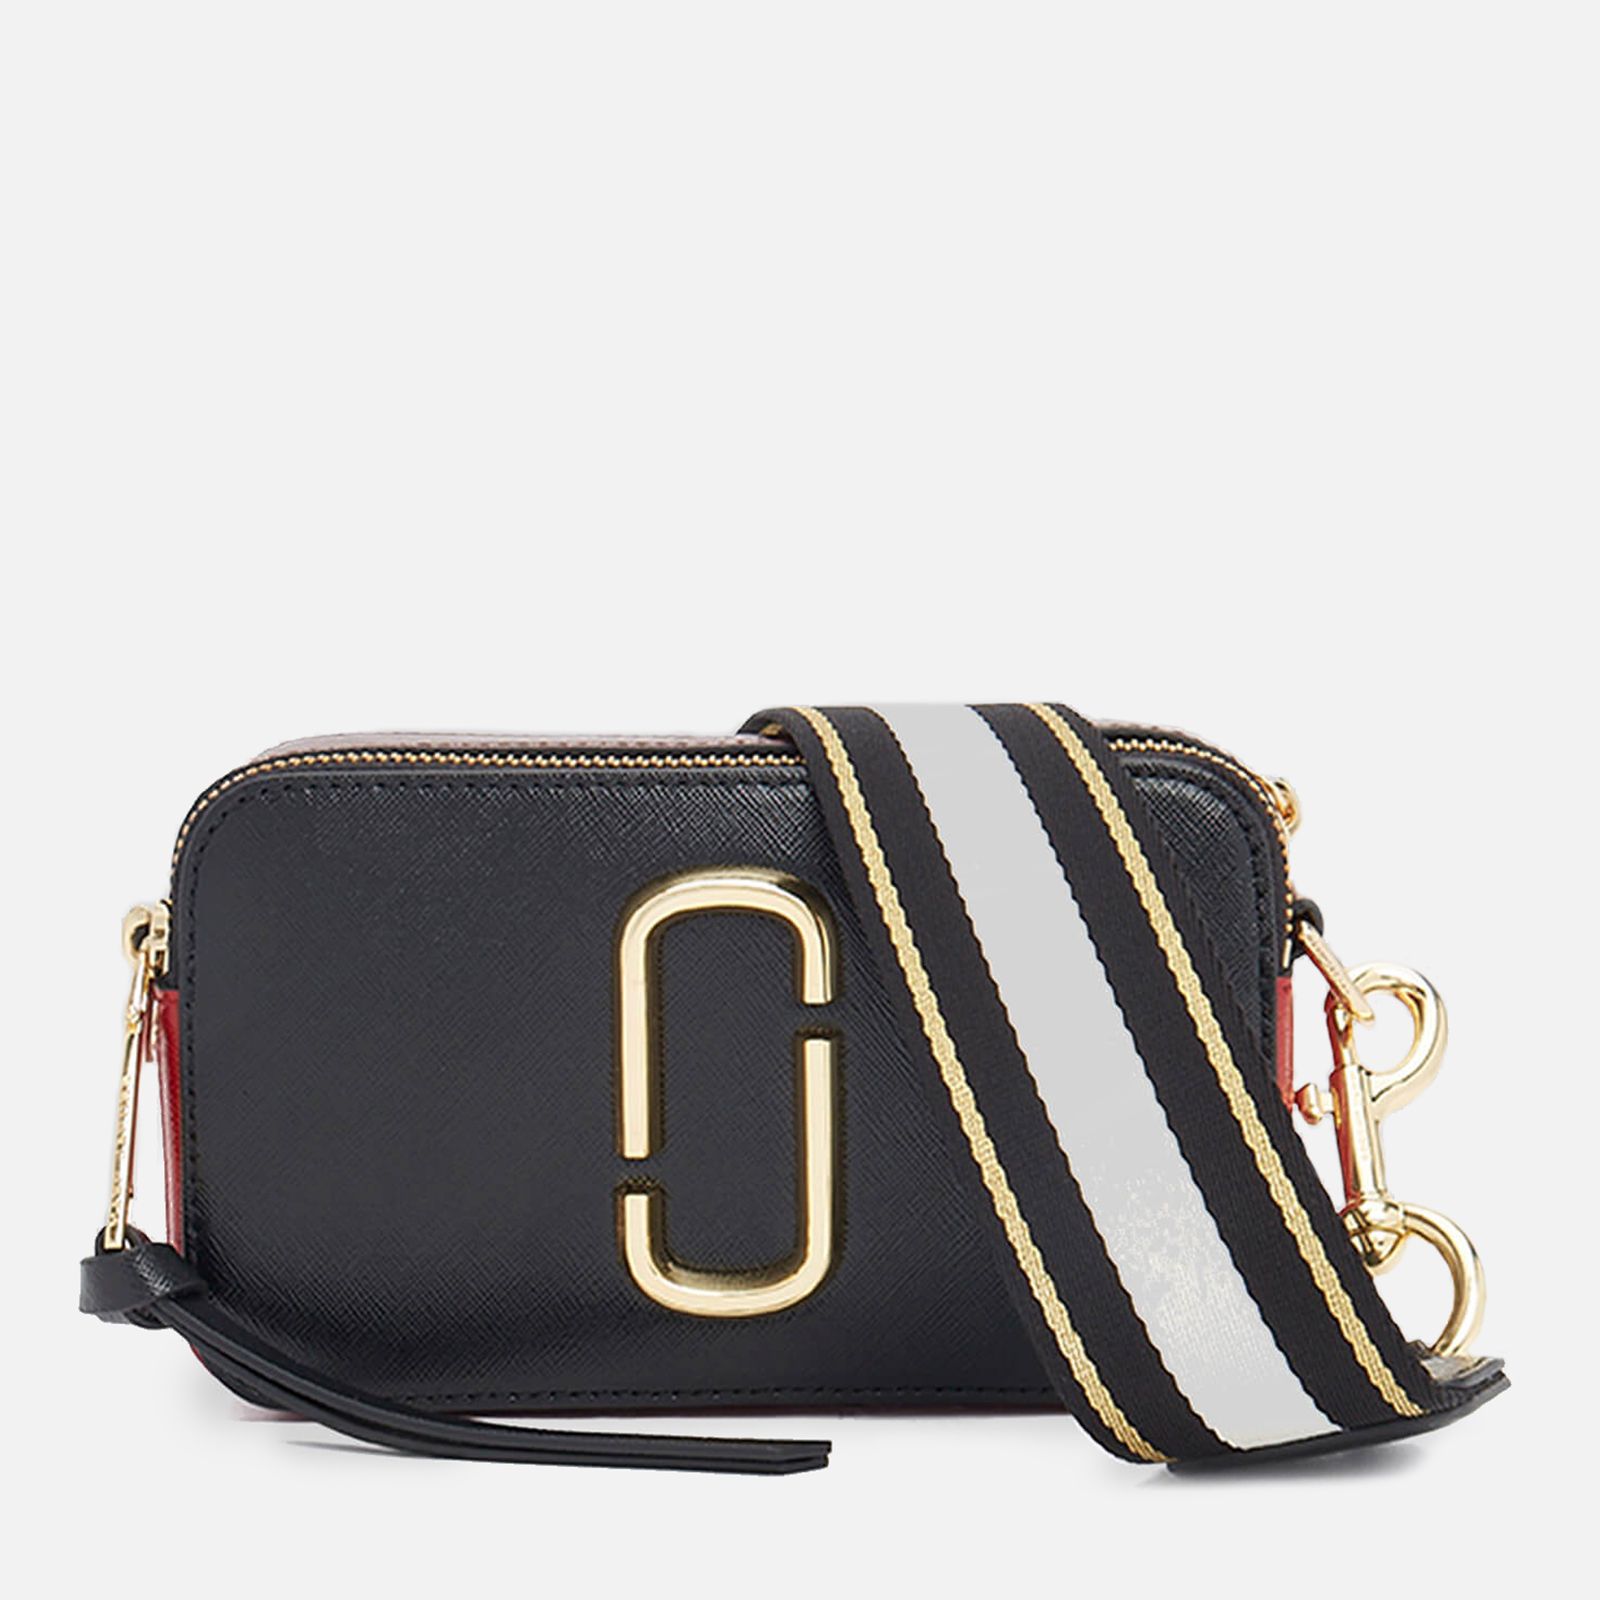 Marc Jacobs Women's Snapshot - Black/Red | Coggles